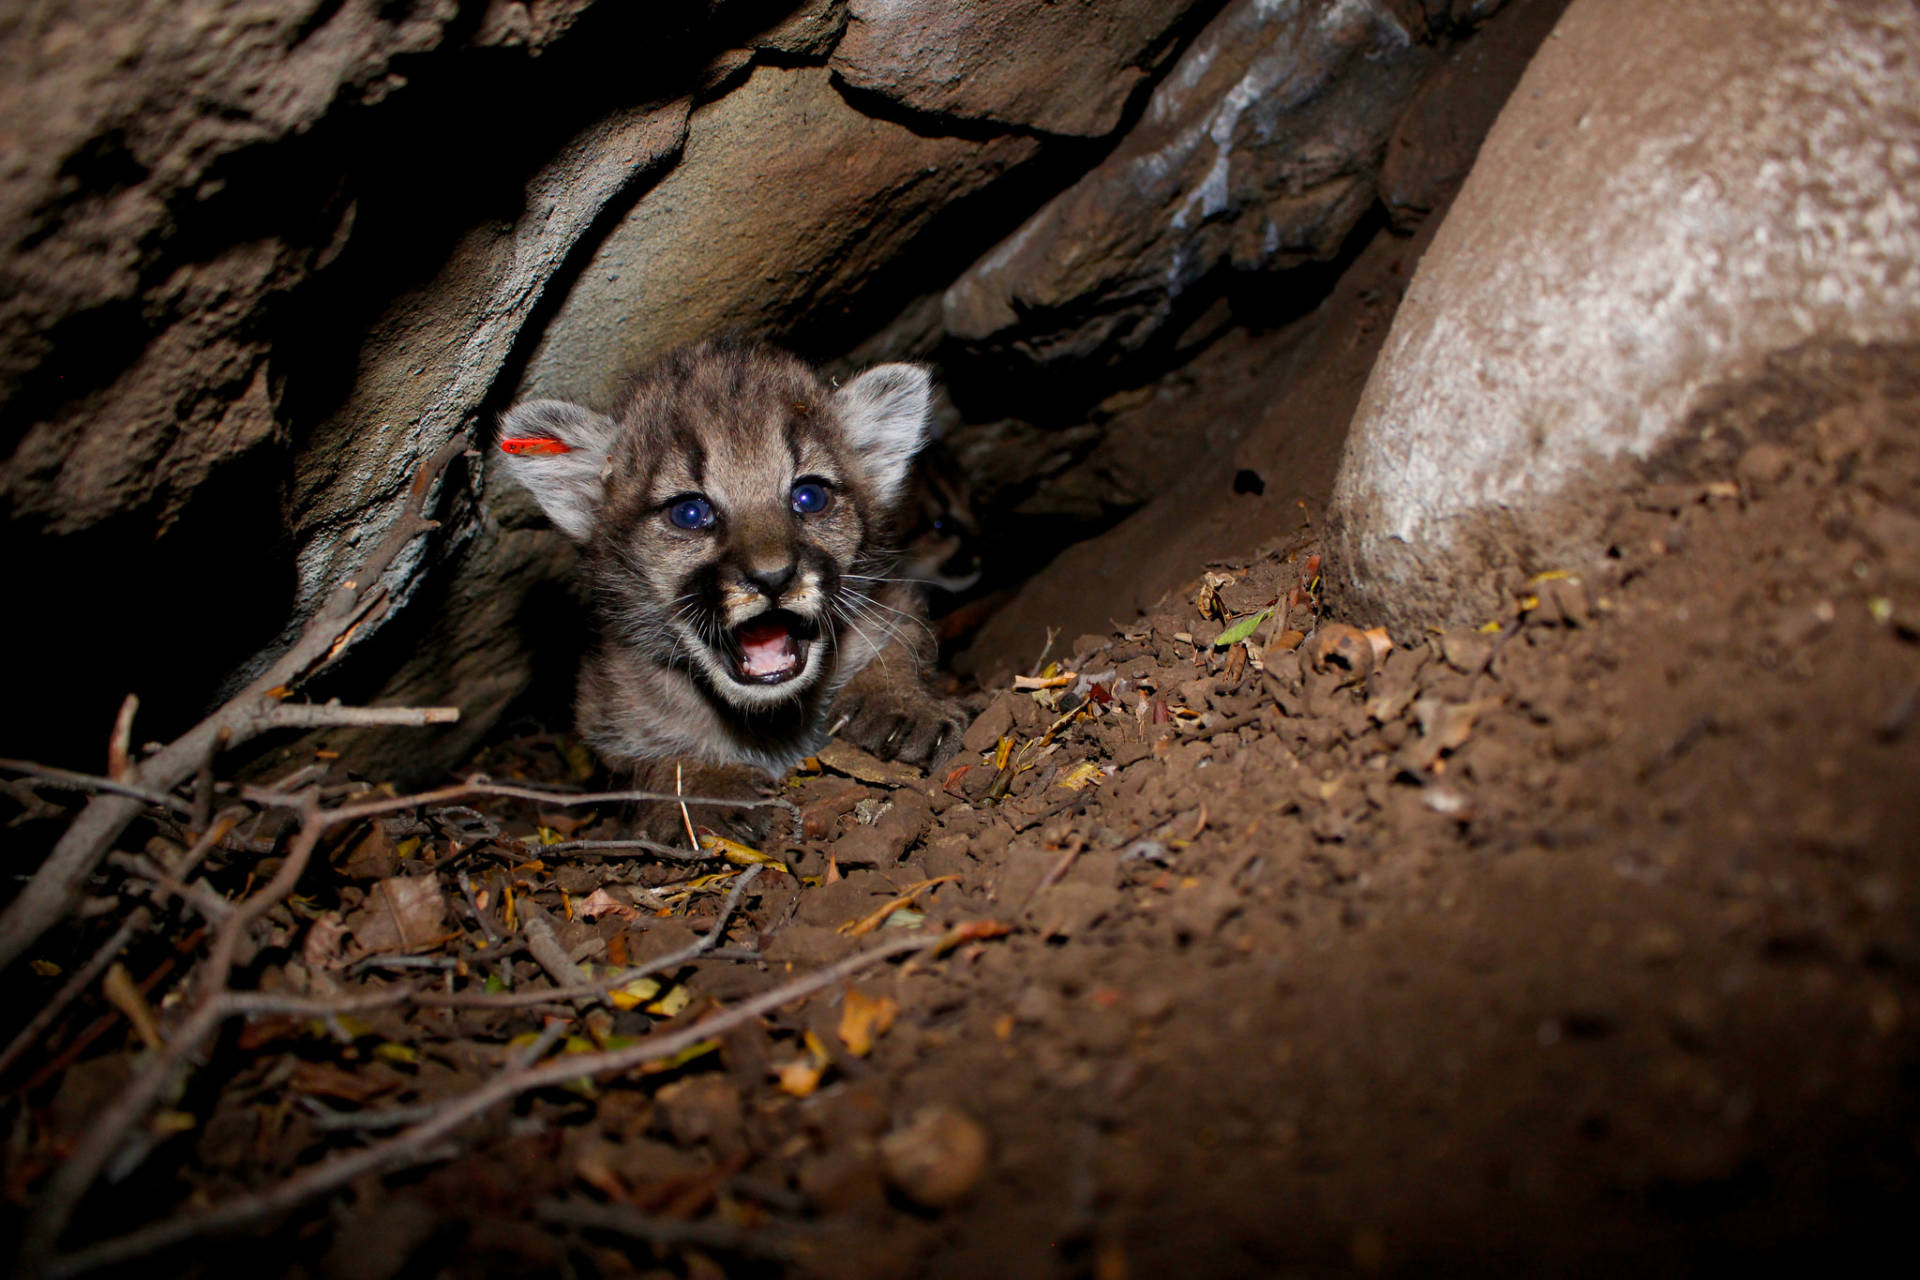 National Park Service researchers discovered a litter of four mountain lion kittens in the Simi Hills, a small area of habitat wedged between the larger Santa Monica and Santa Susana mountain ranges. All four kittens are females and are now known as P-66, P-67, P-68, and P-69. Their mom is P-62. National Park Service